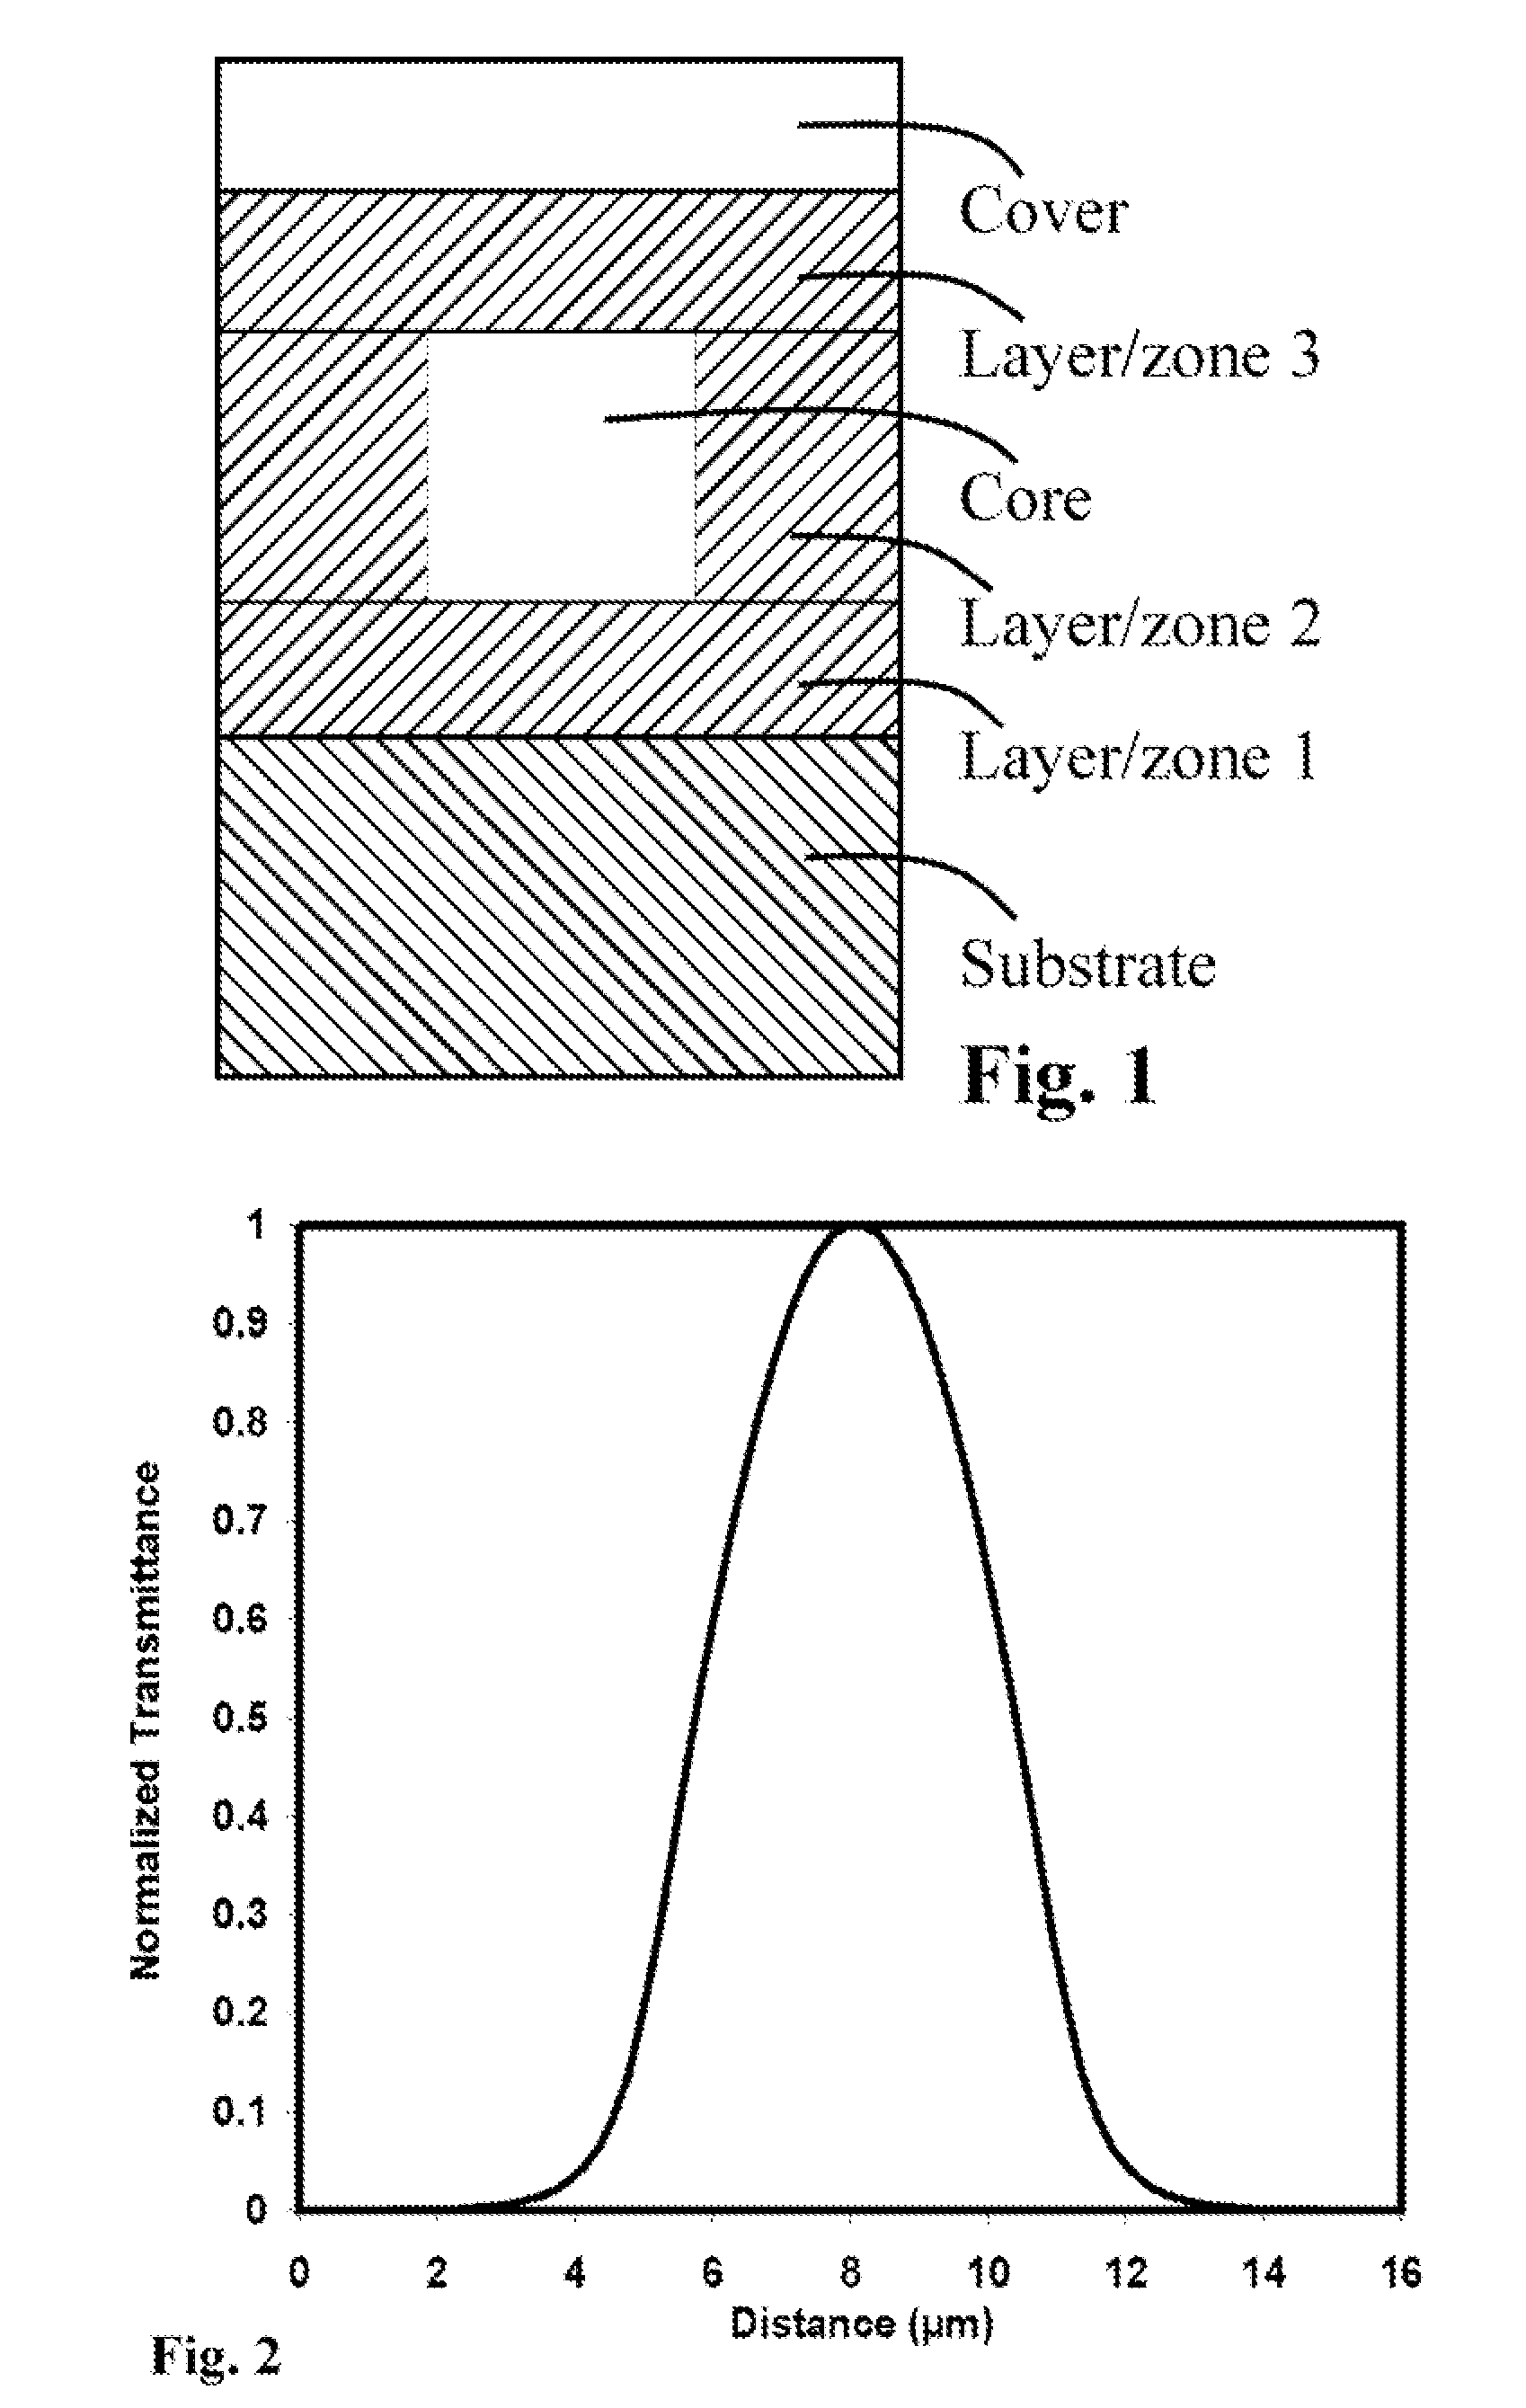 Photonic waveguide structures for chip-scale photonic integrated circuits